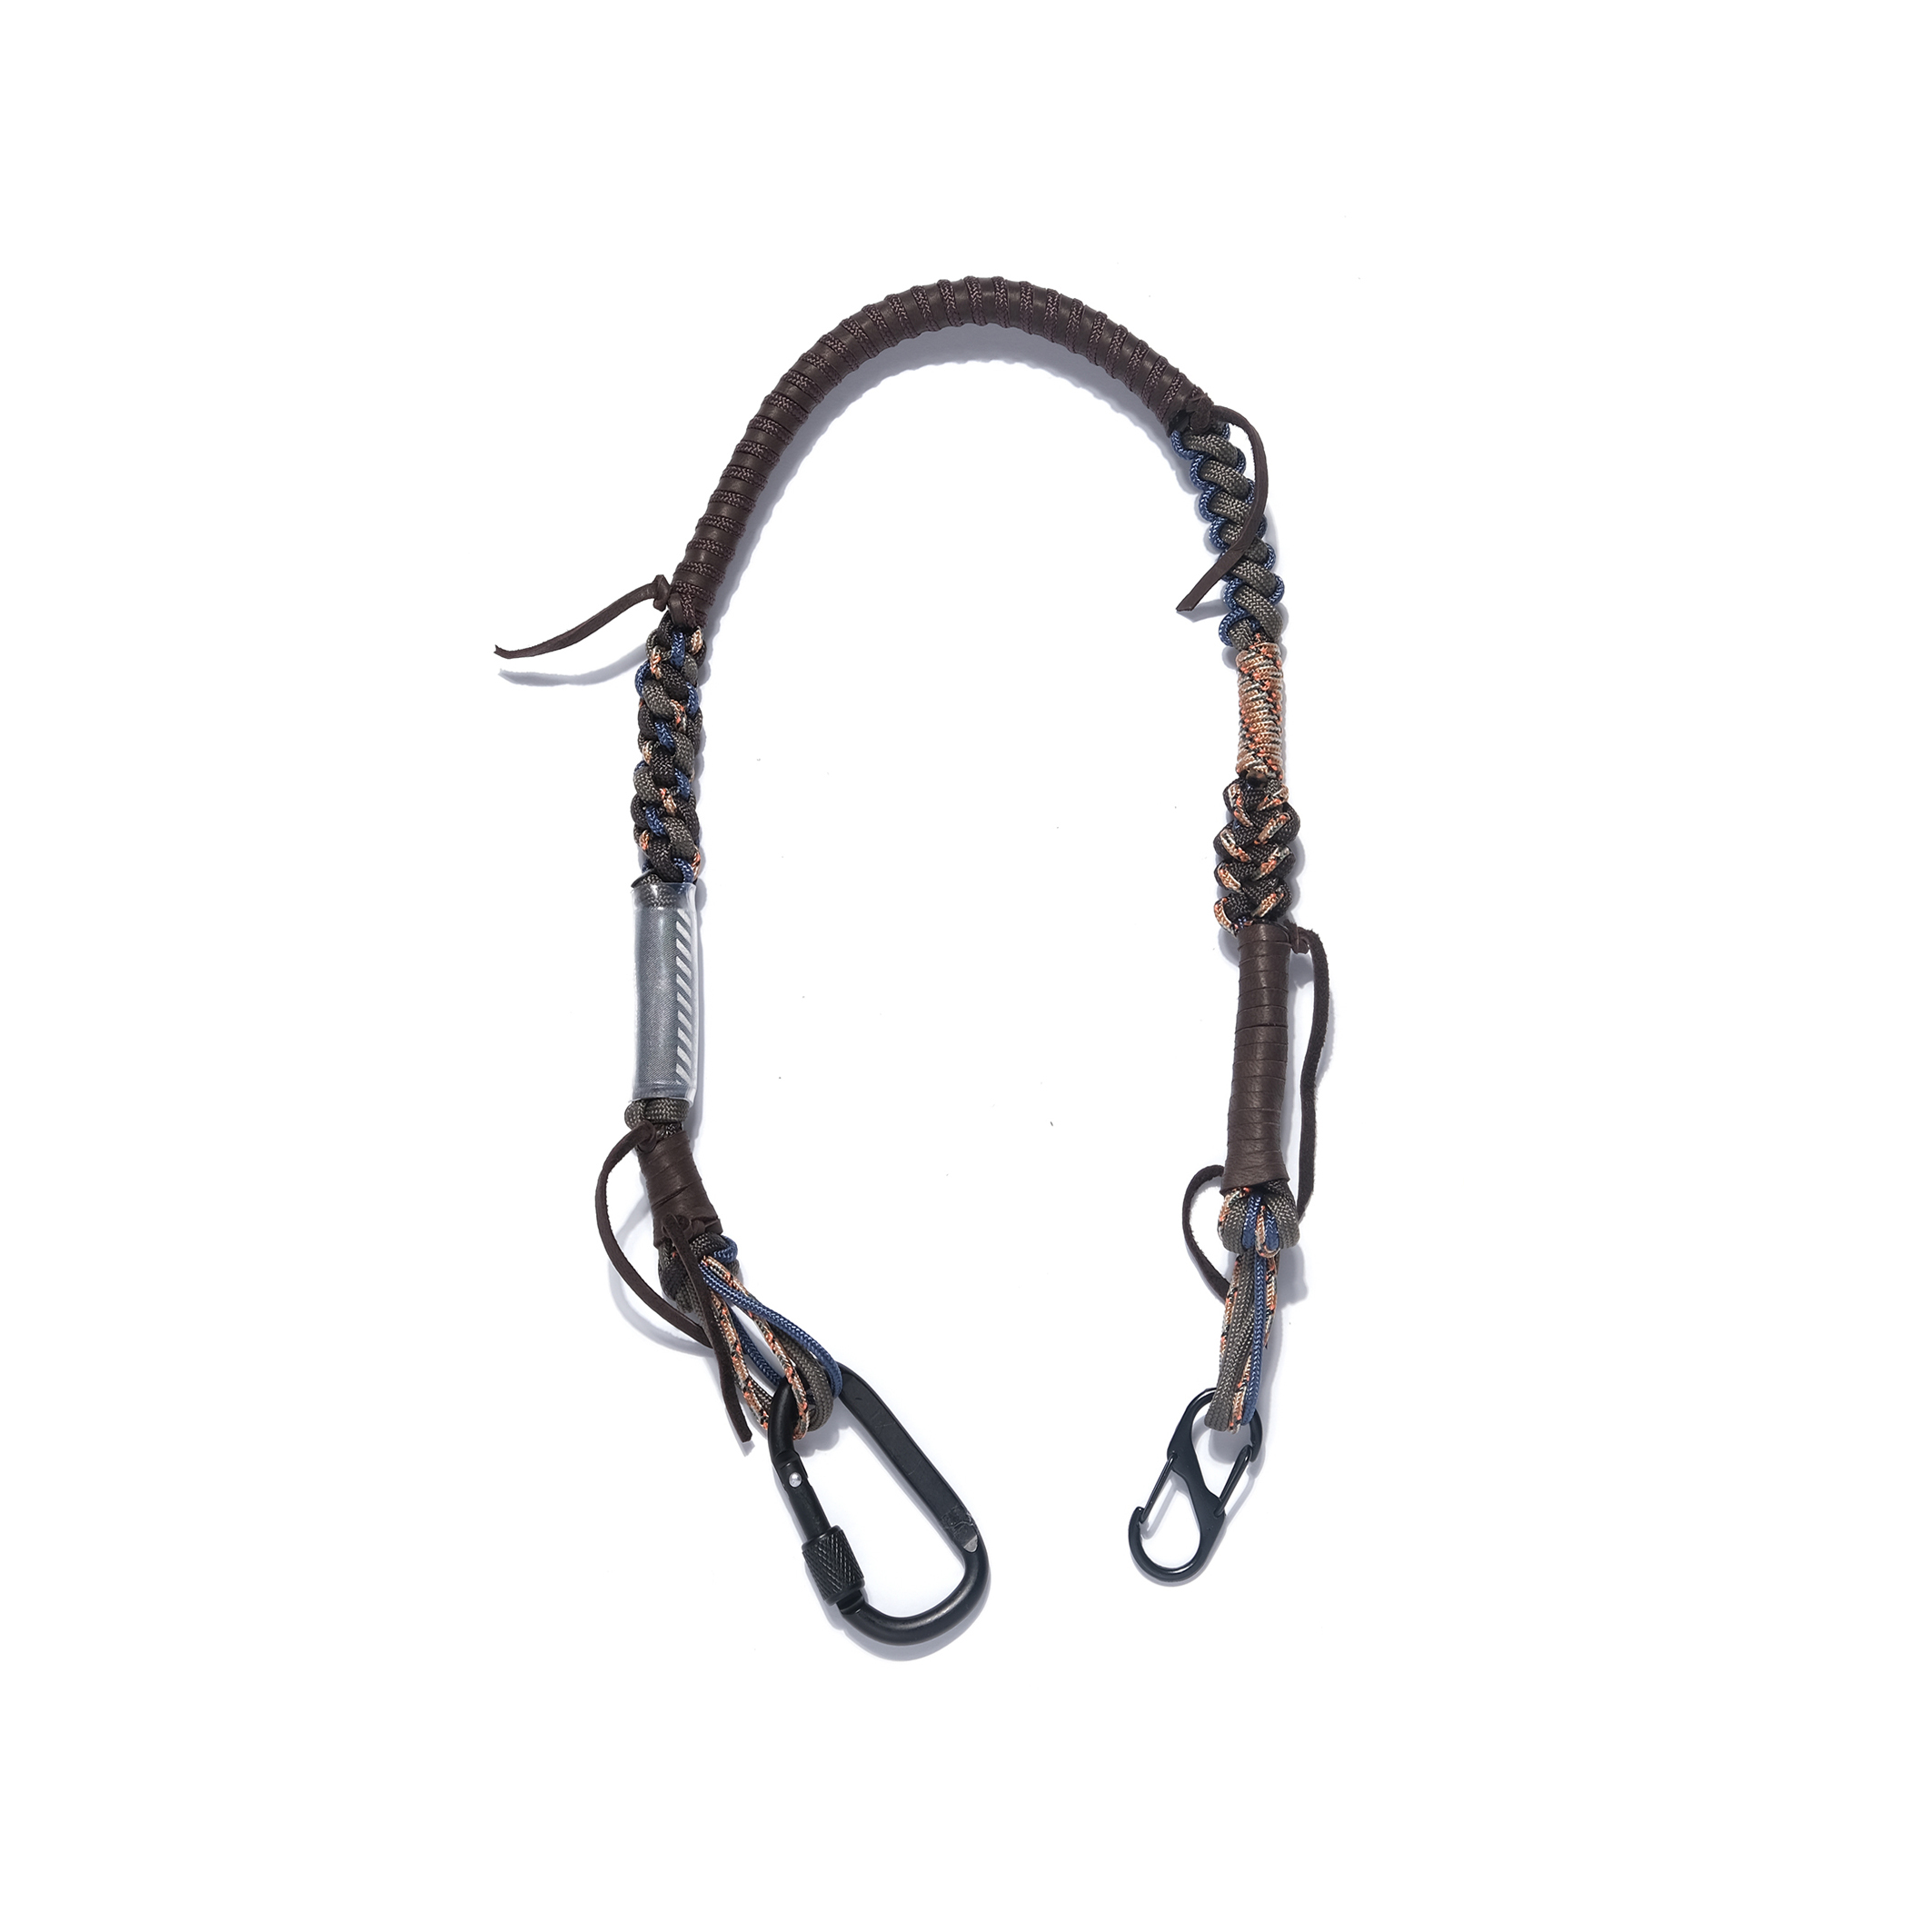 B:TOGETHER - “ROPE” Leather Mix - 24inch